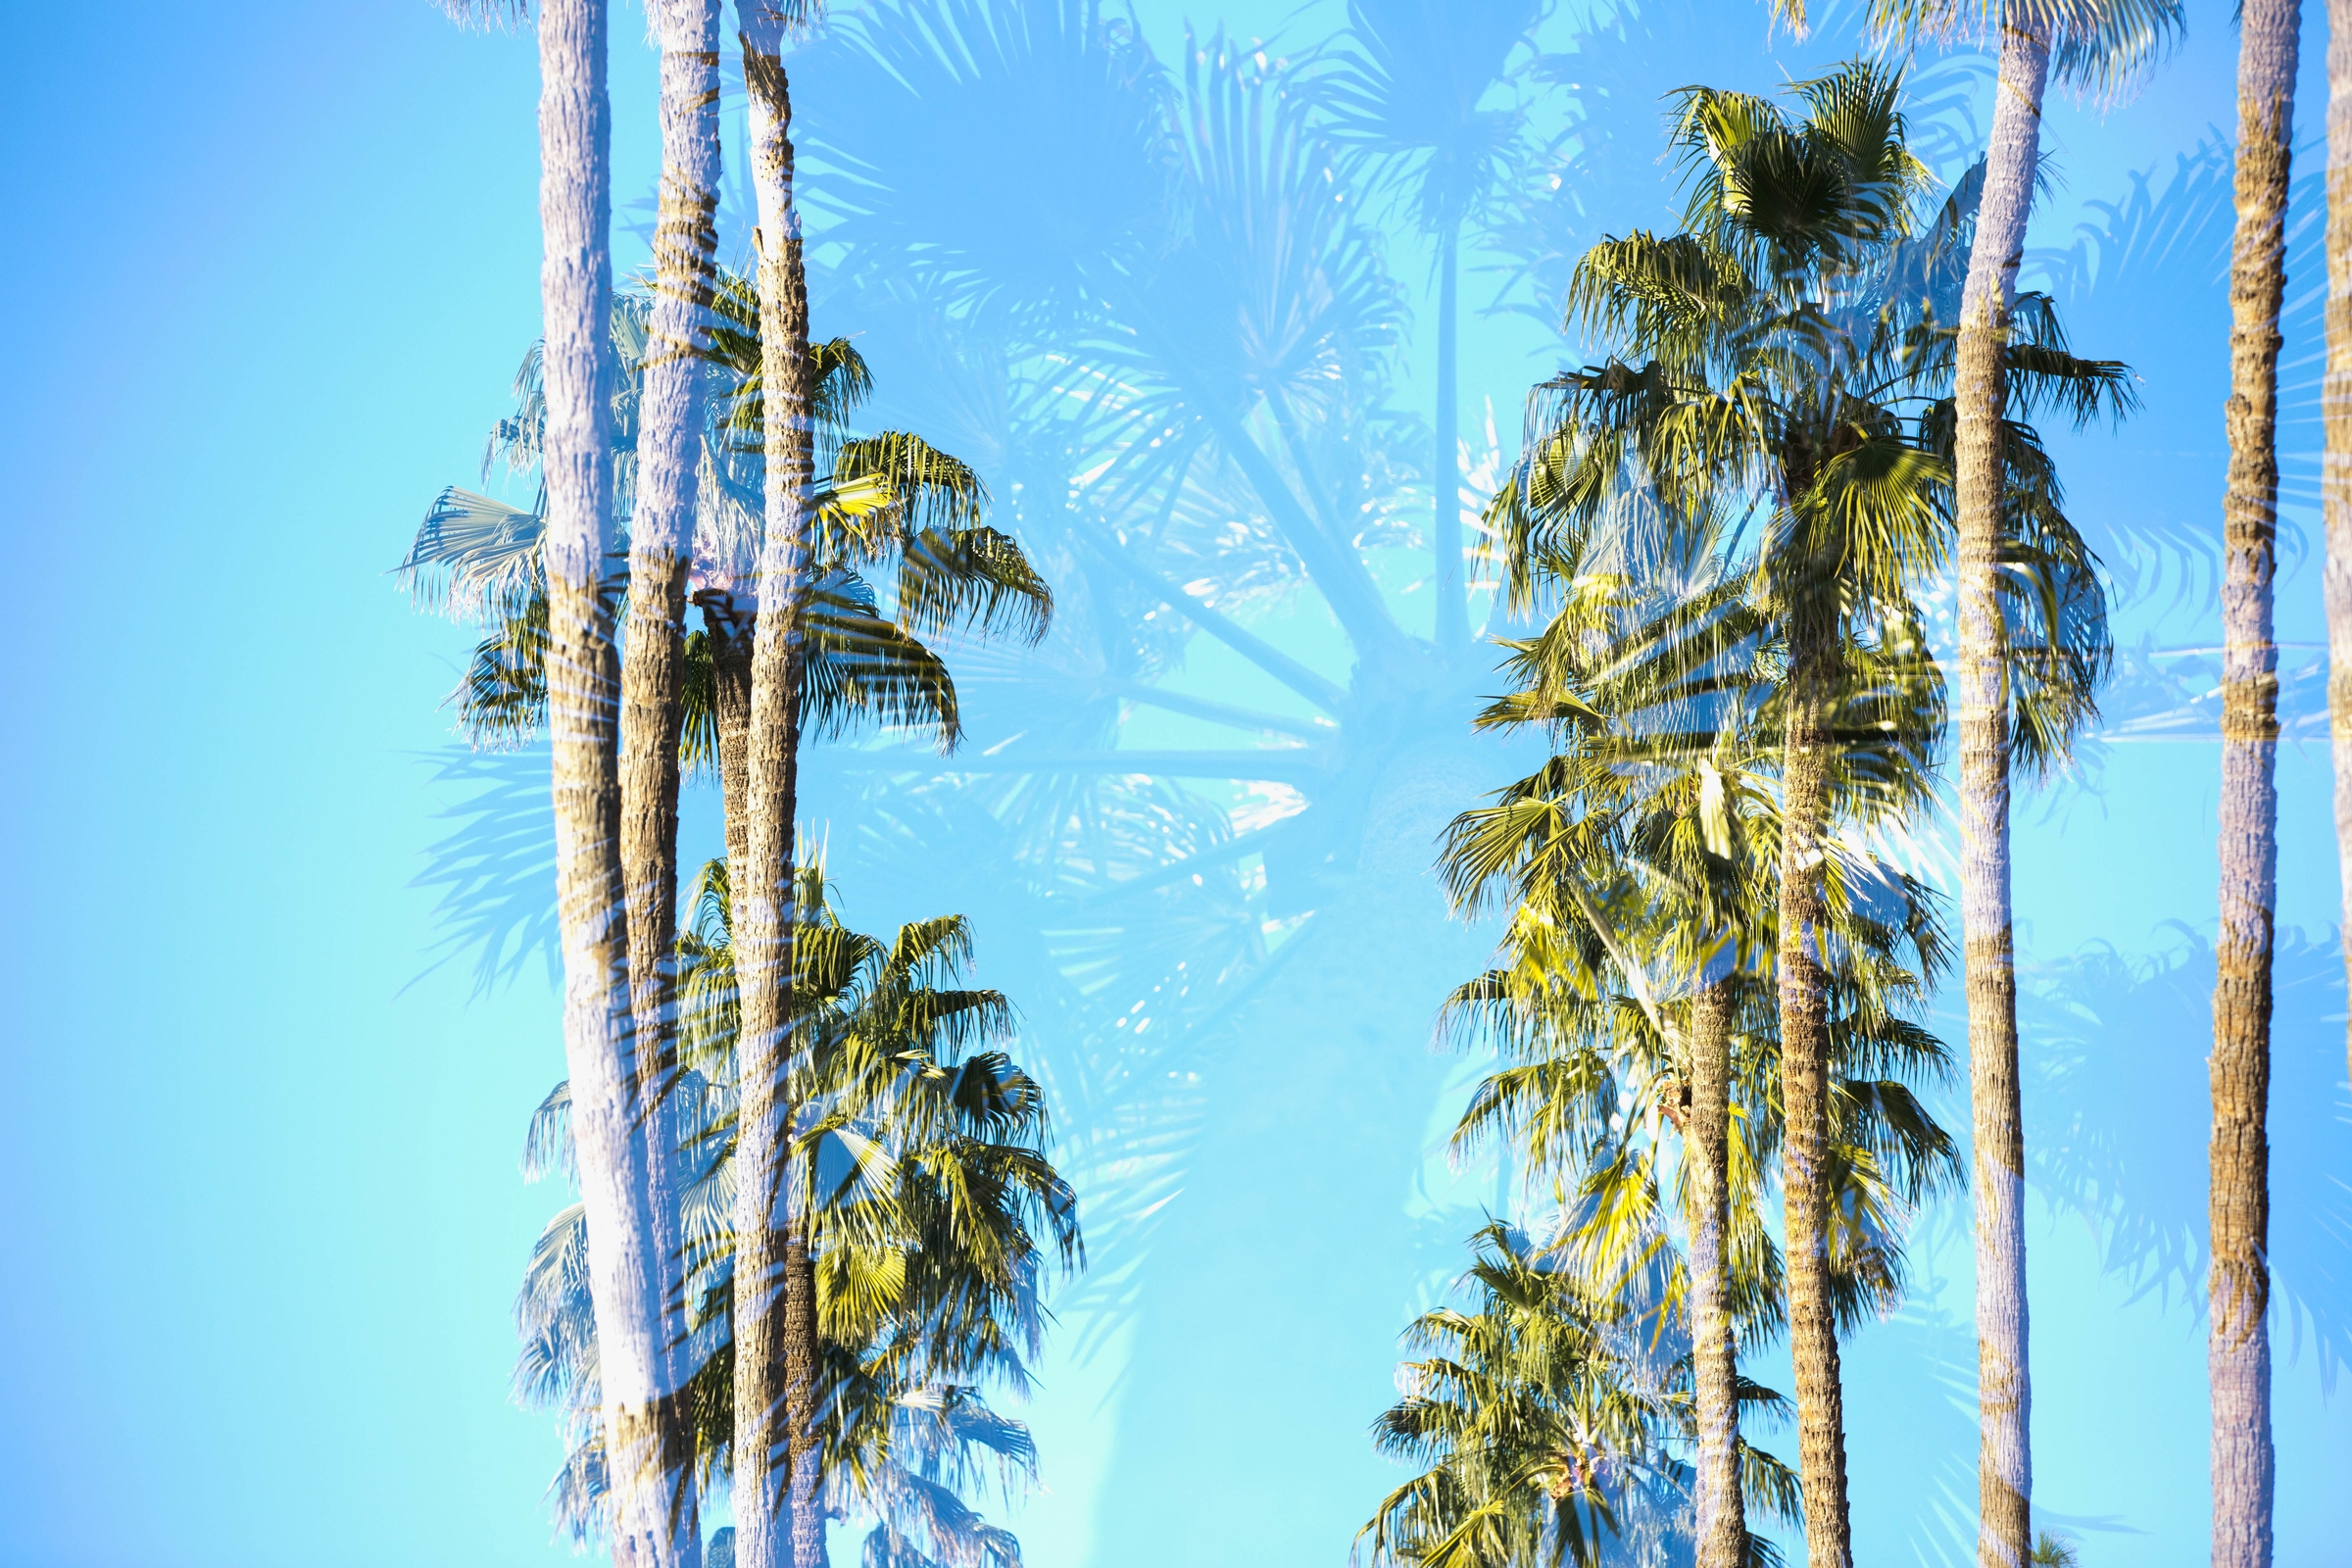 Two rows of palm trees against a bright blue sky.